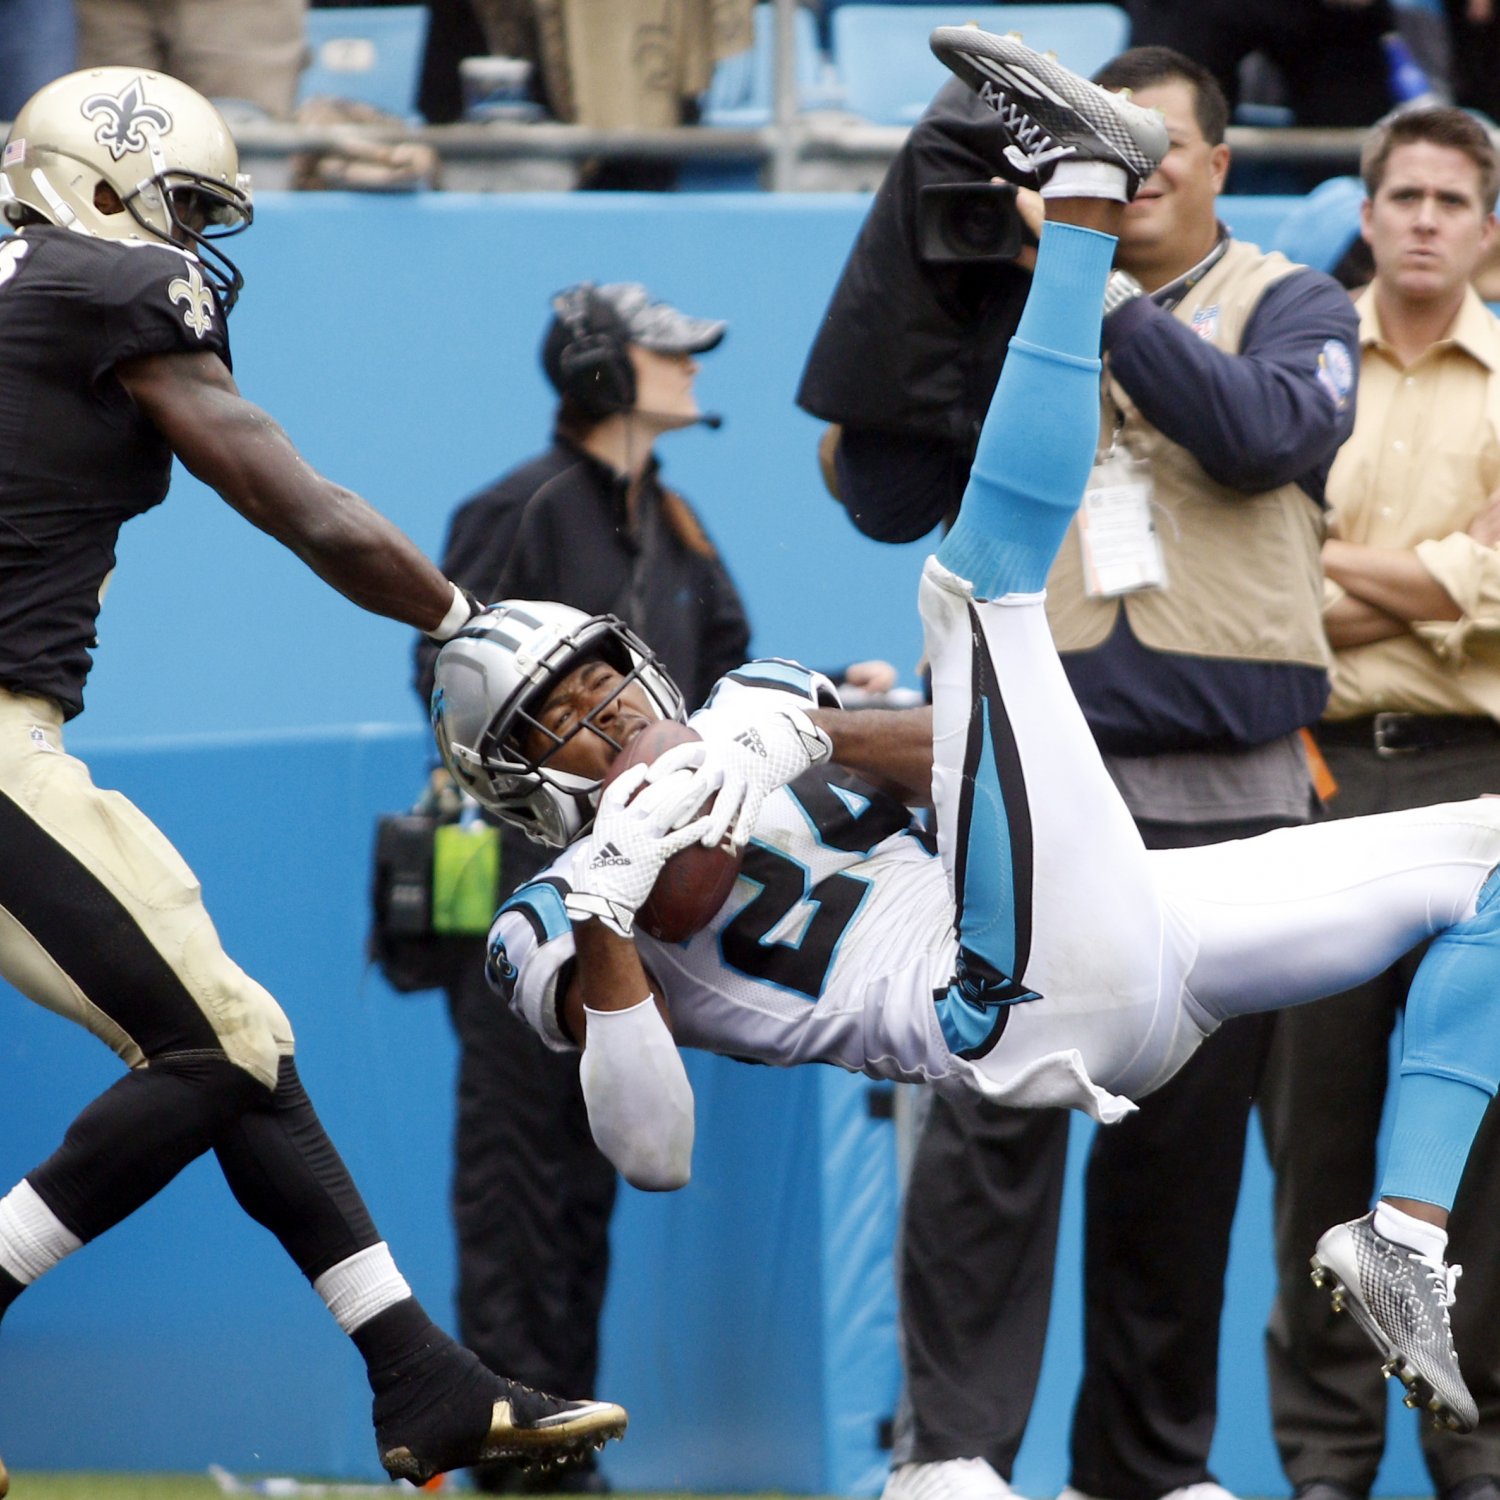 Panthers vs. Saints: What's the Game Plan for Carolina? | Bleacher Report